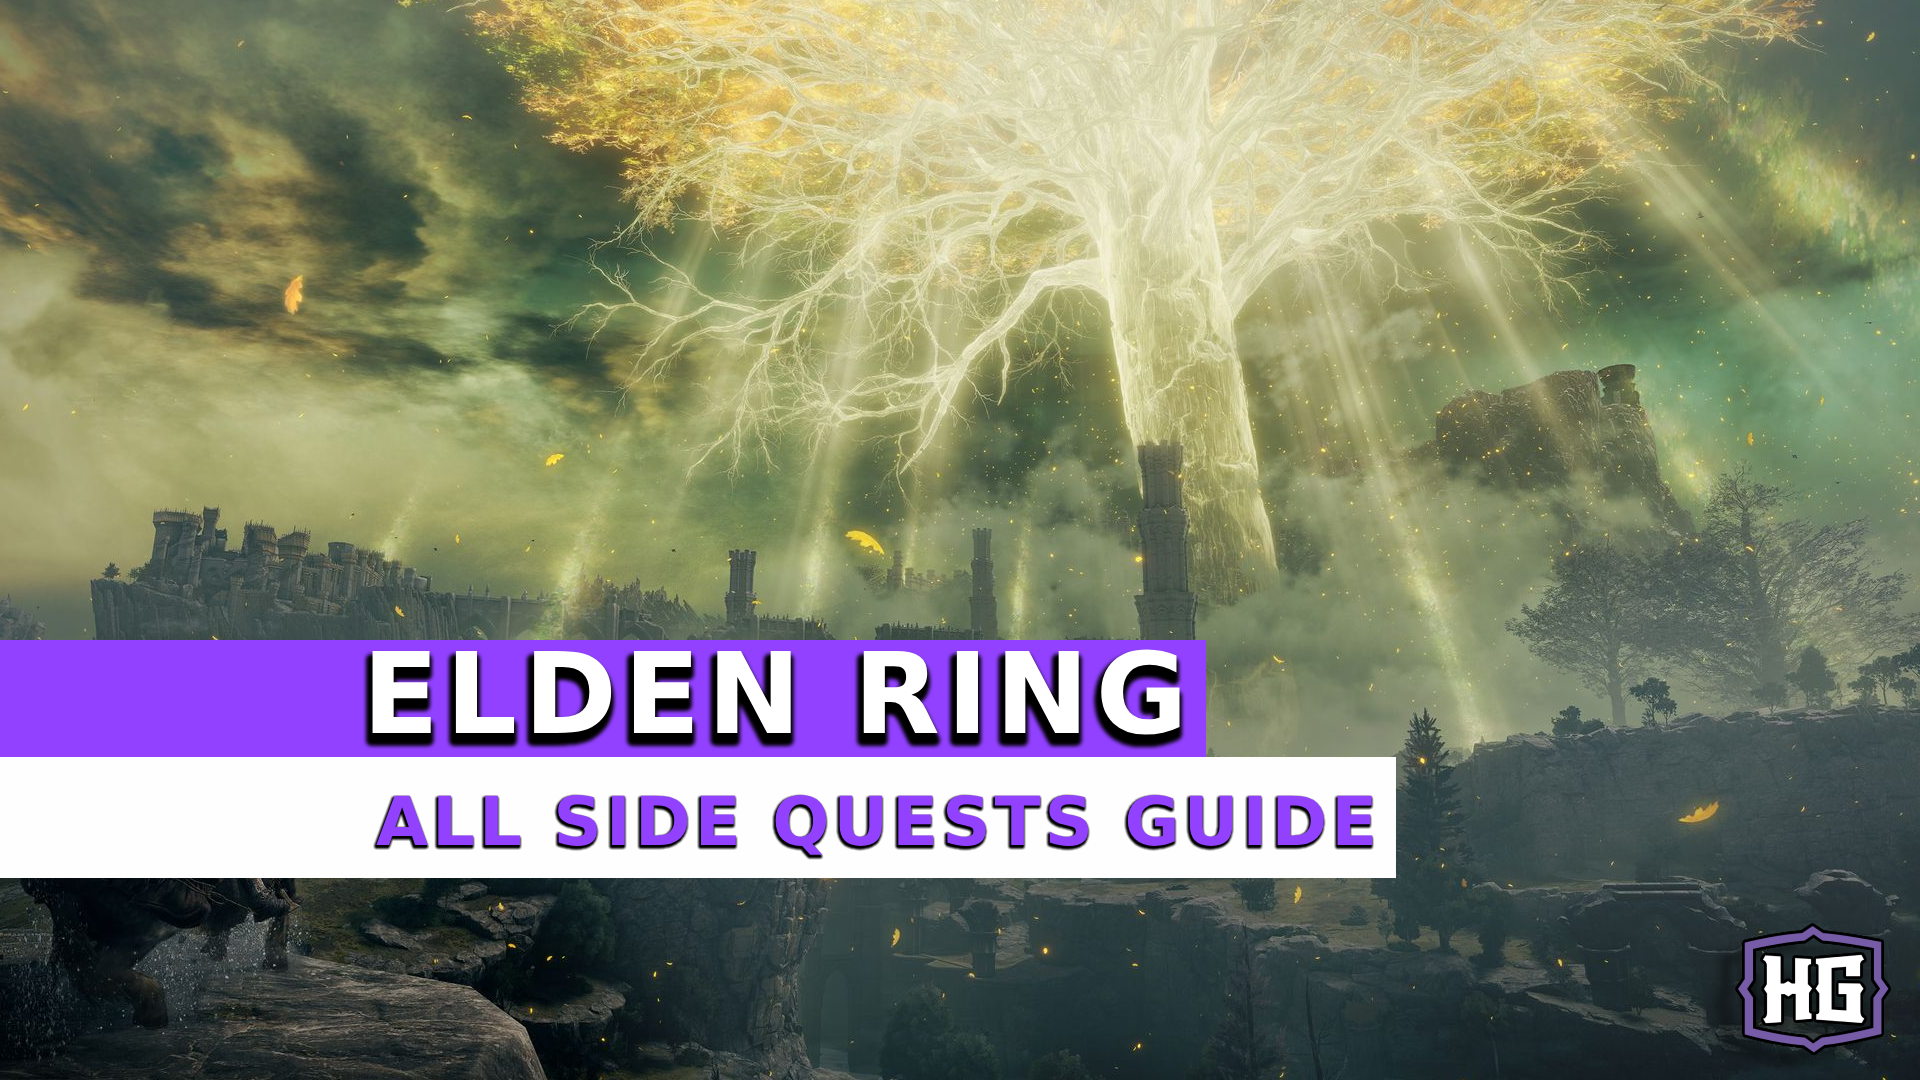 Elden Ring: All Side Quests